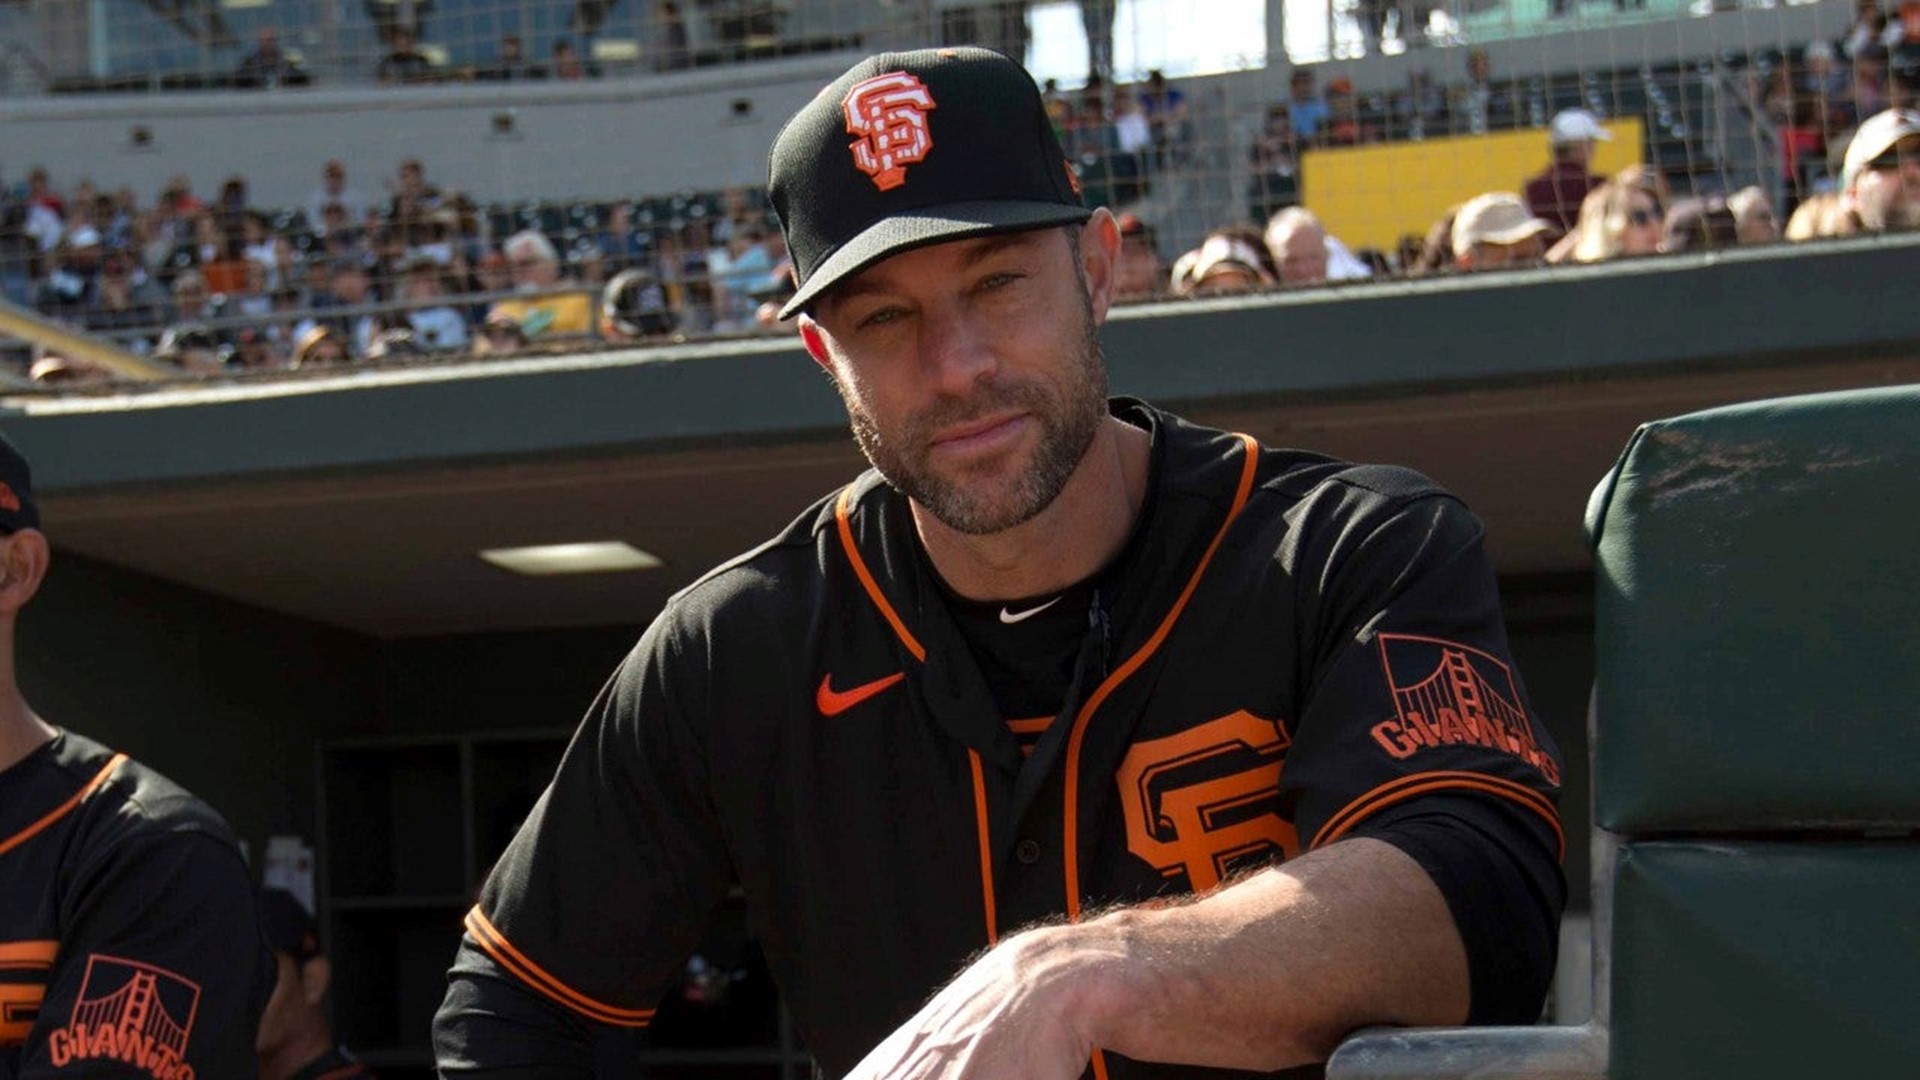 Giants' Gabe Kapler Is First MLB Manager to Kneel During National